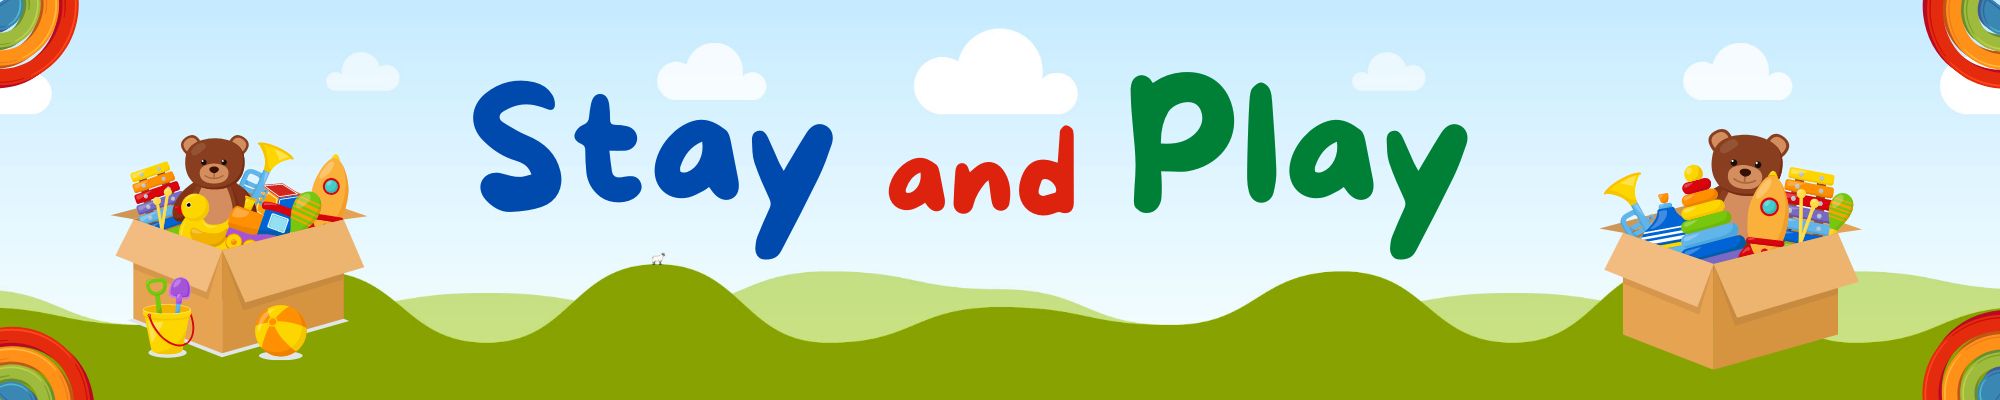 Copy of Stay & Play banner (20